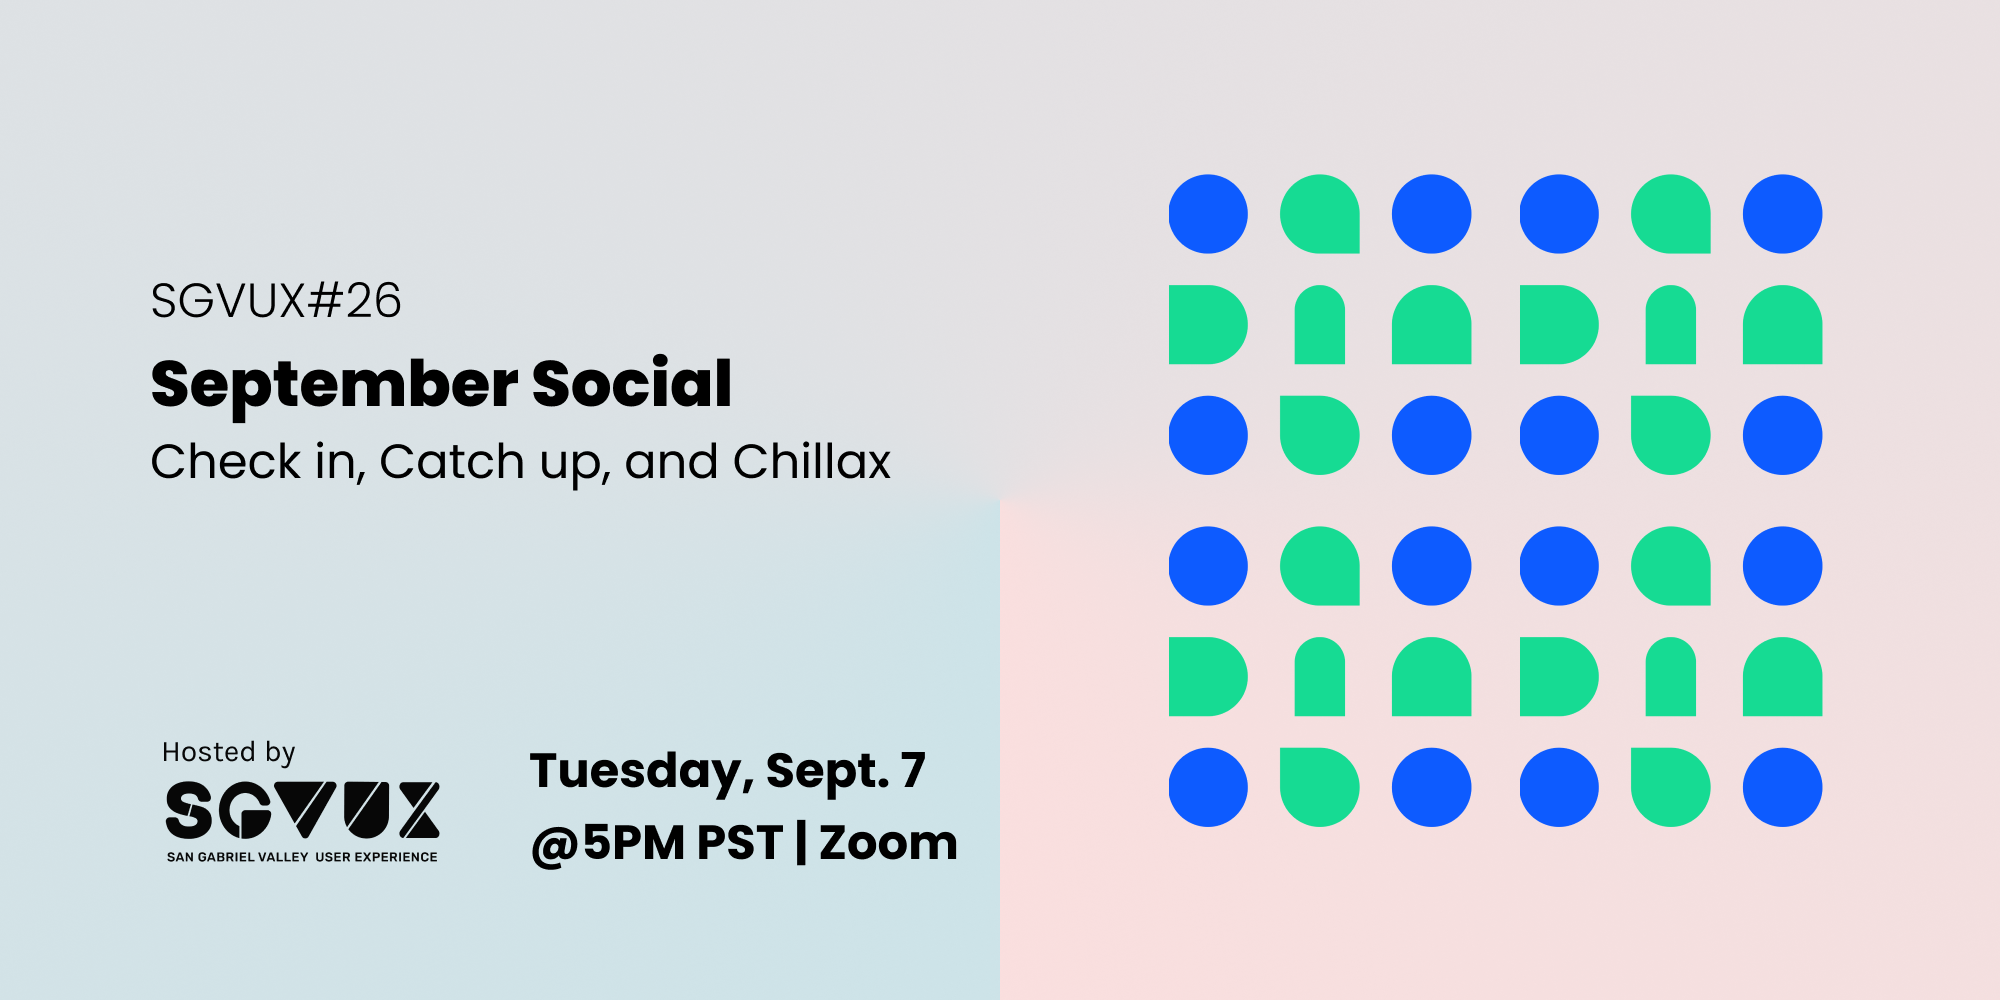 SGVUX#26: September Social with apprentices